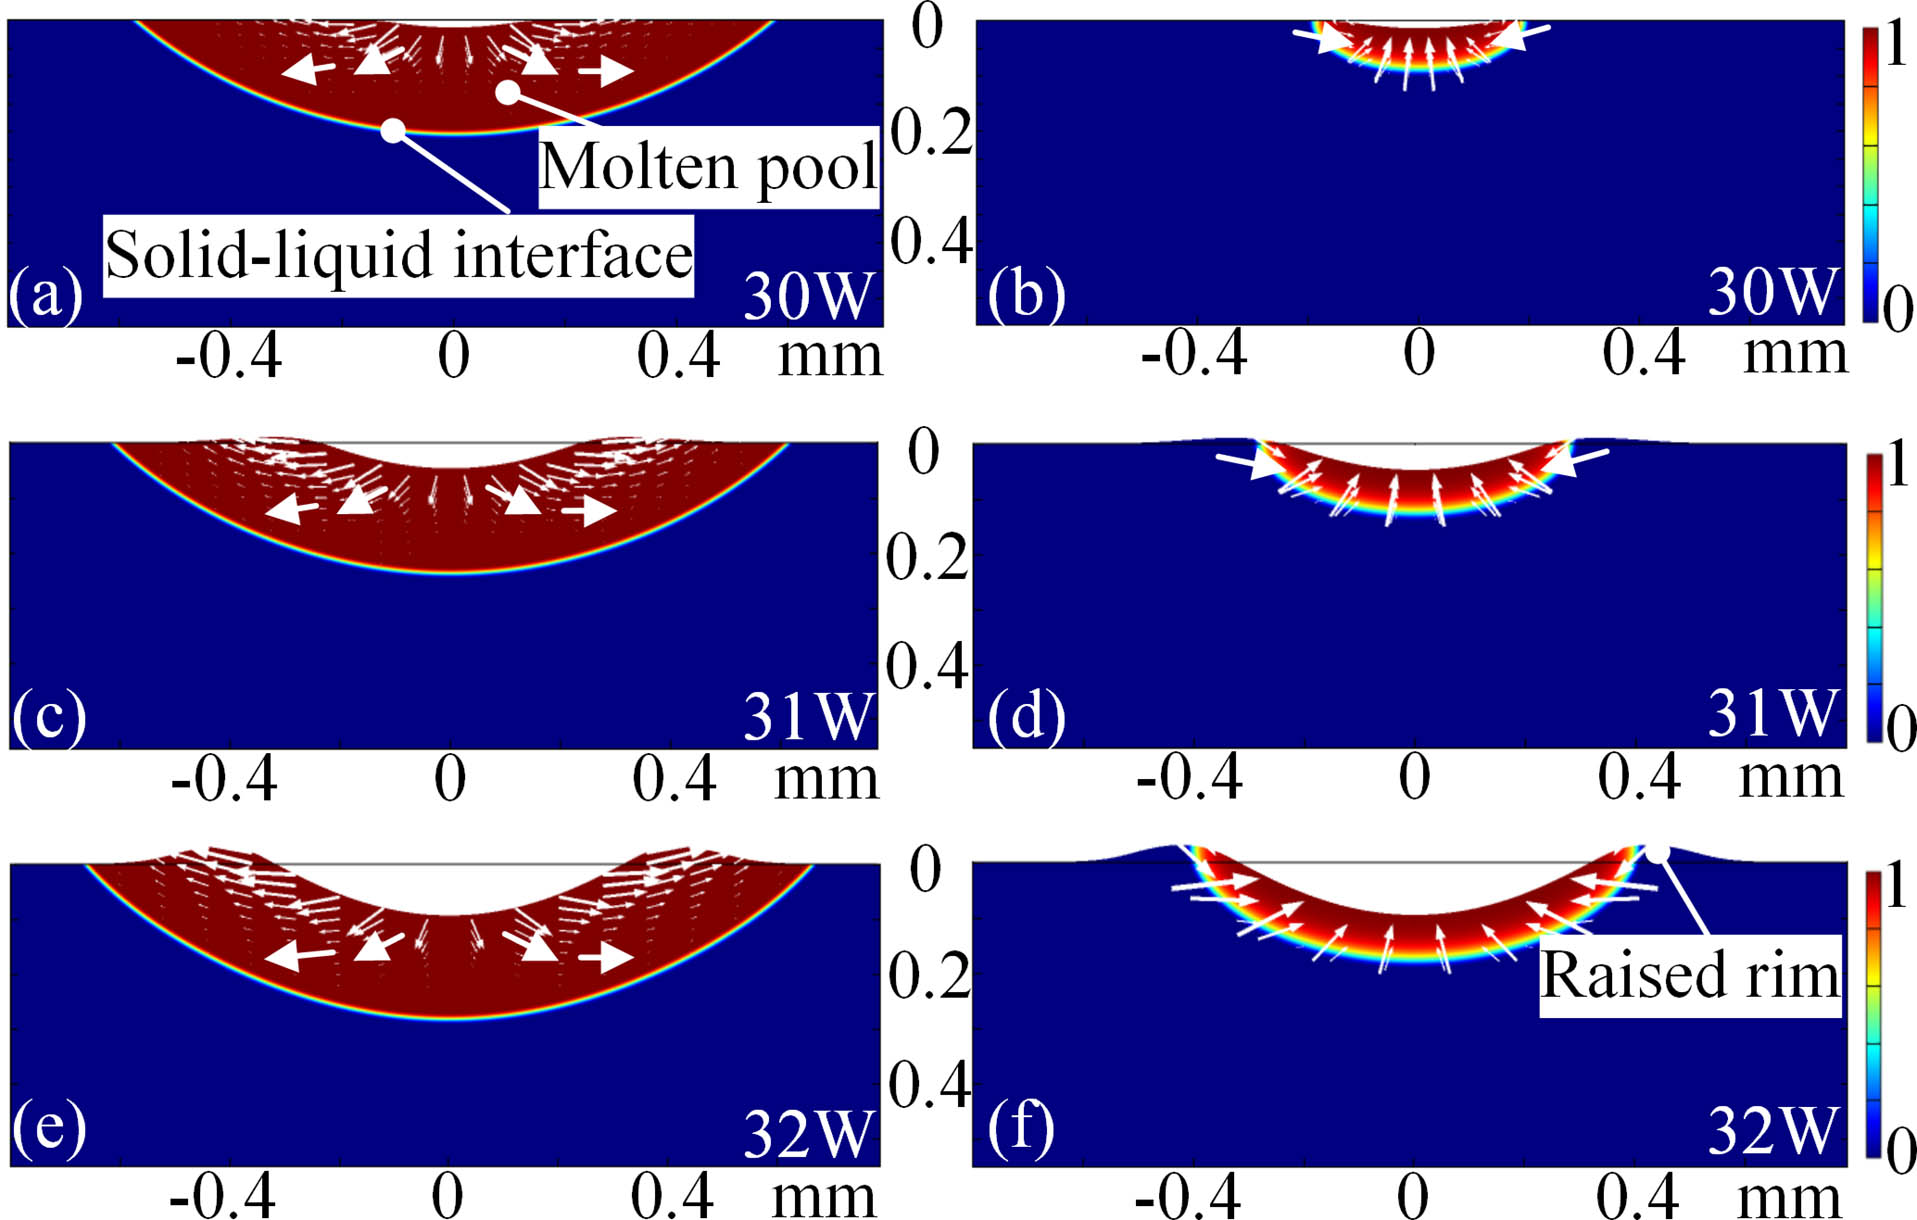 Surface morphology evolutions and phase transition processes of fused silica optics irradiated by CO2 lasers with different powers. (a), (c), (e) represent the heating stage at the laser action time of 5 s; (b), (d), (f) are the cases when cooling is for 0.1 s. In the pseudo-color scale, one represents the liquid phase, while zero represents the solid phase.